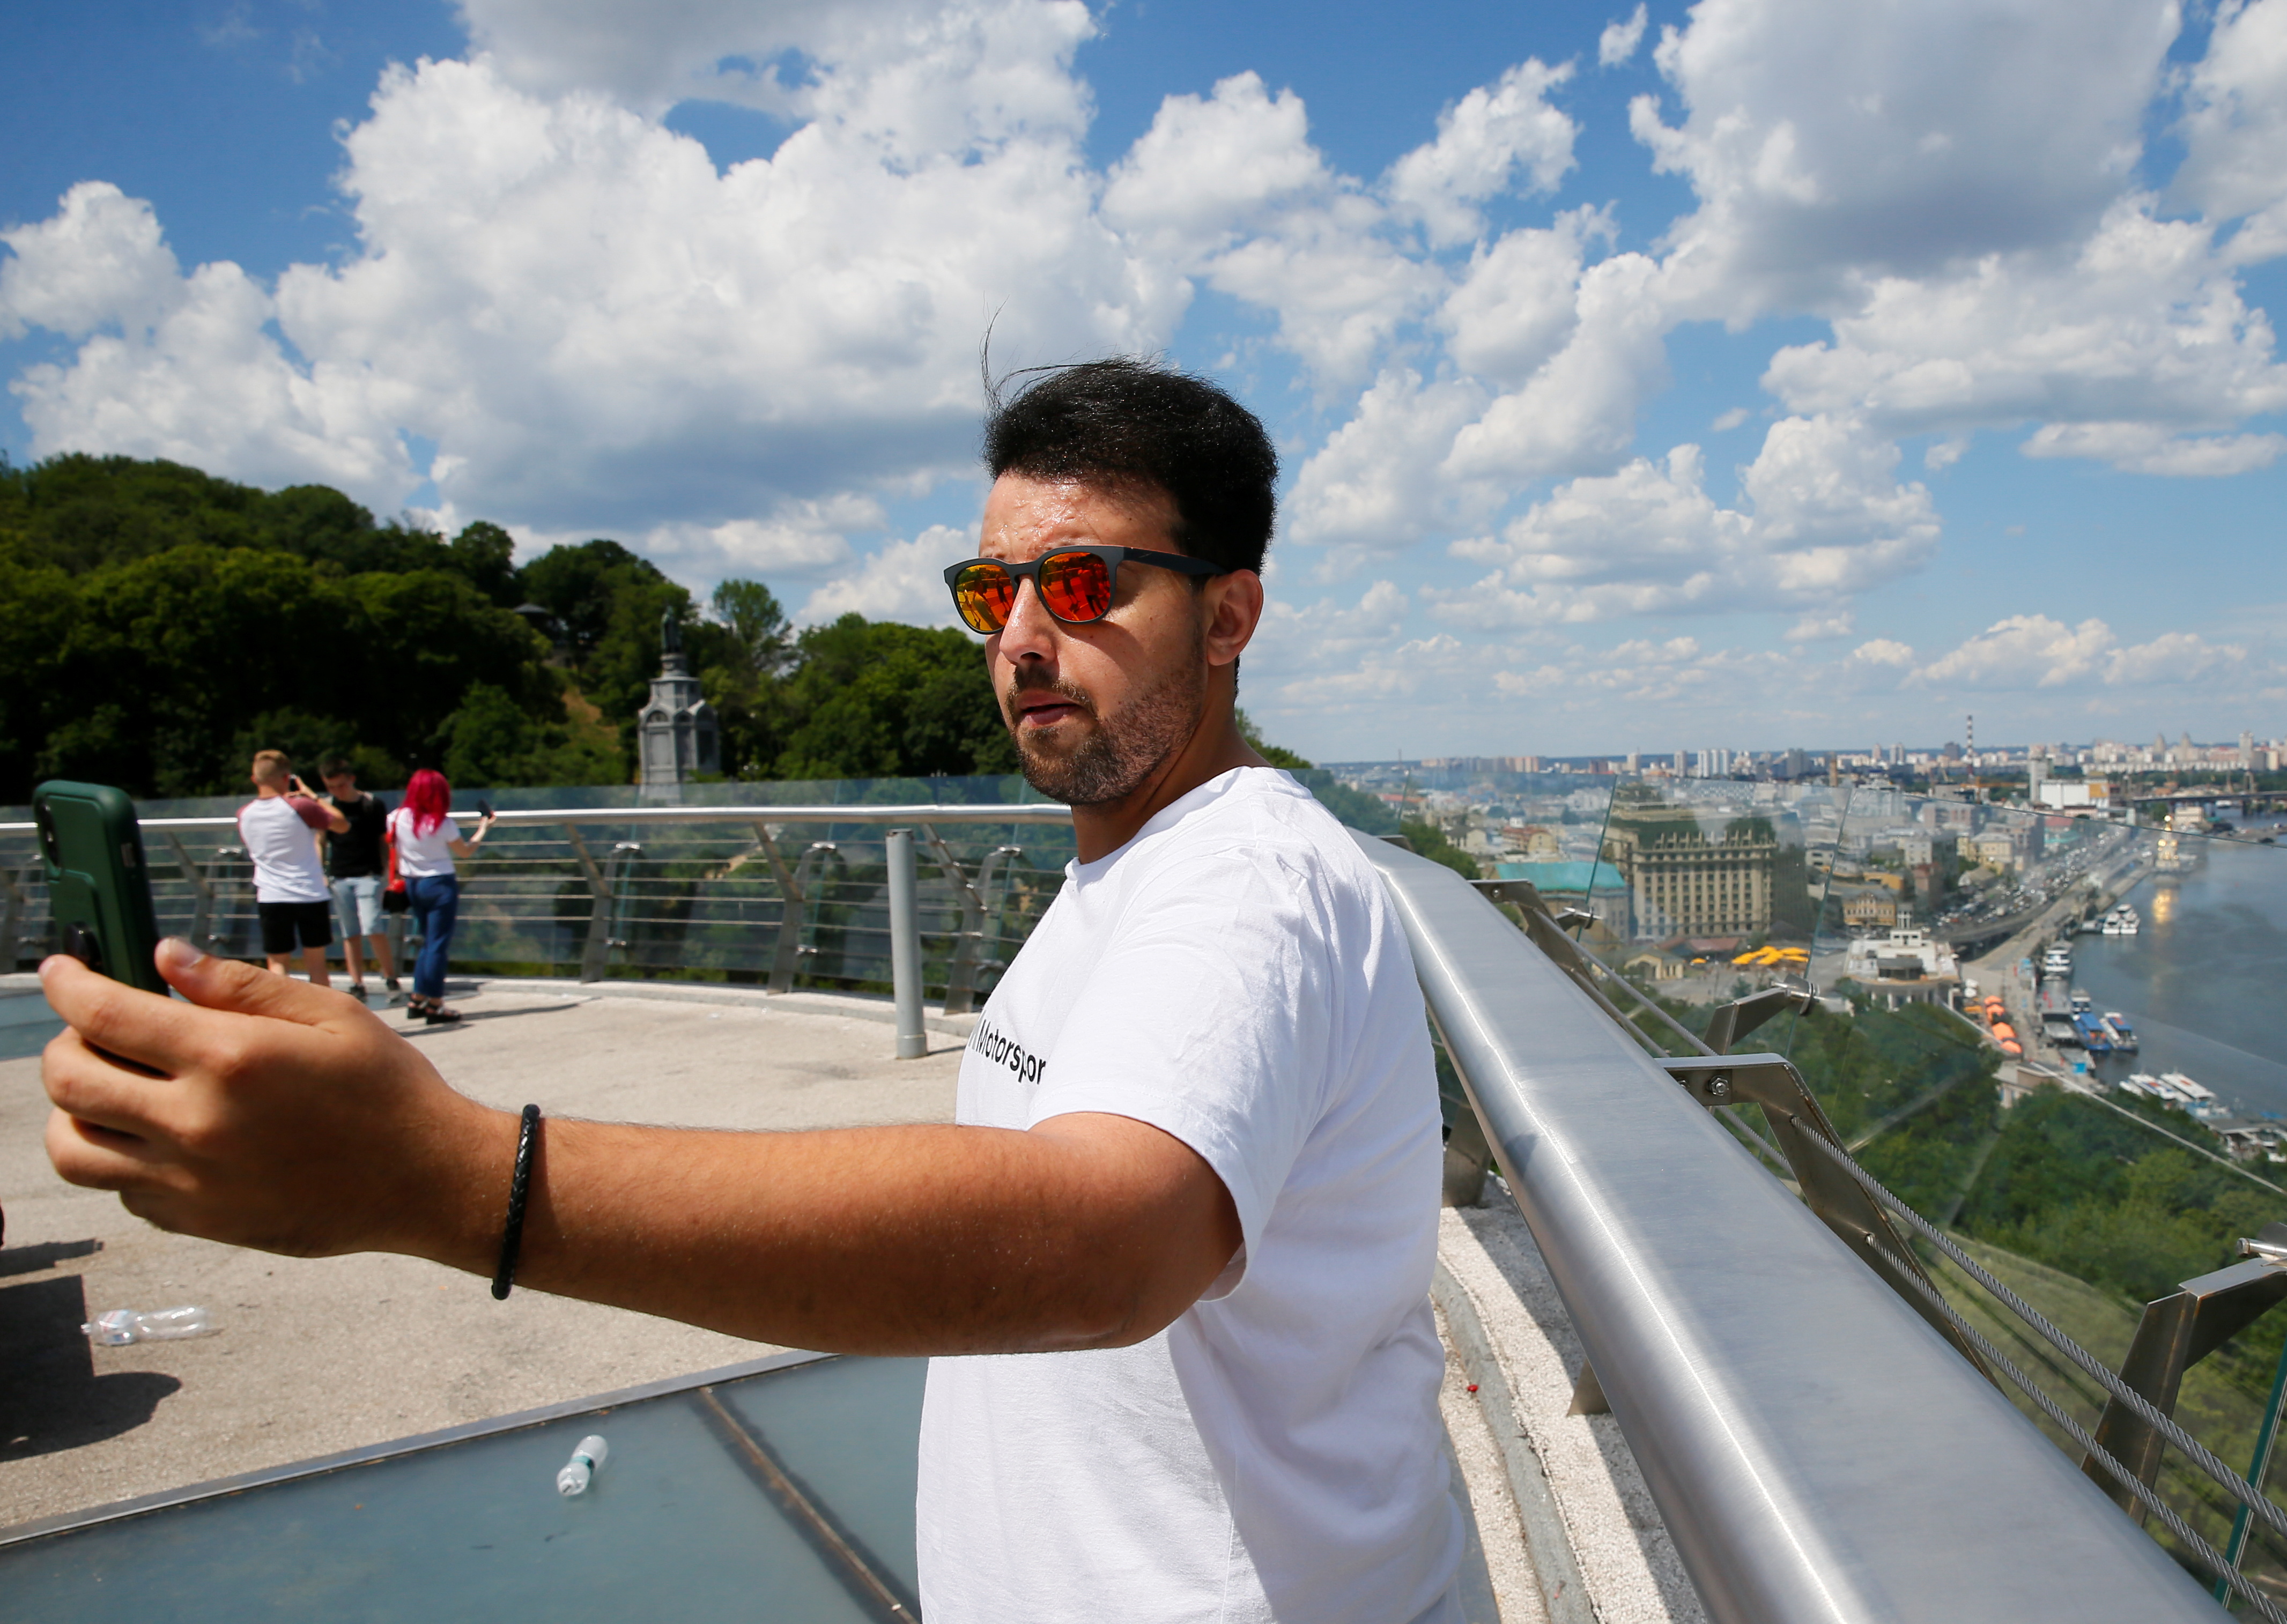 A tourist from Saudi Arabia takes a selfie in central Kyiv